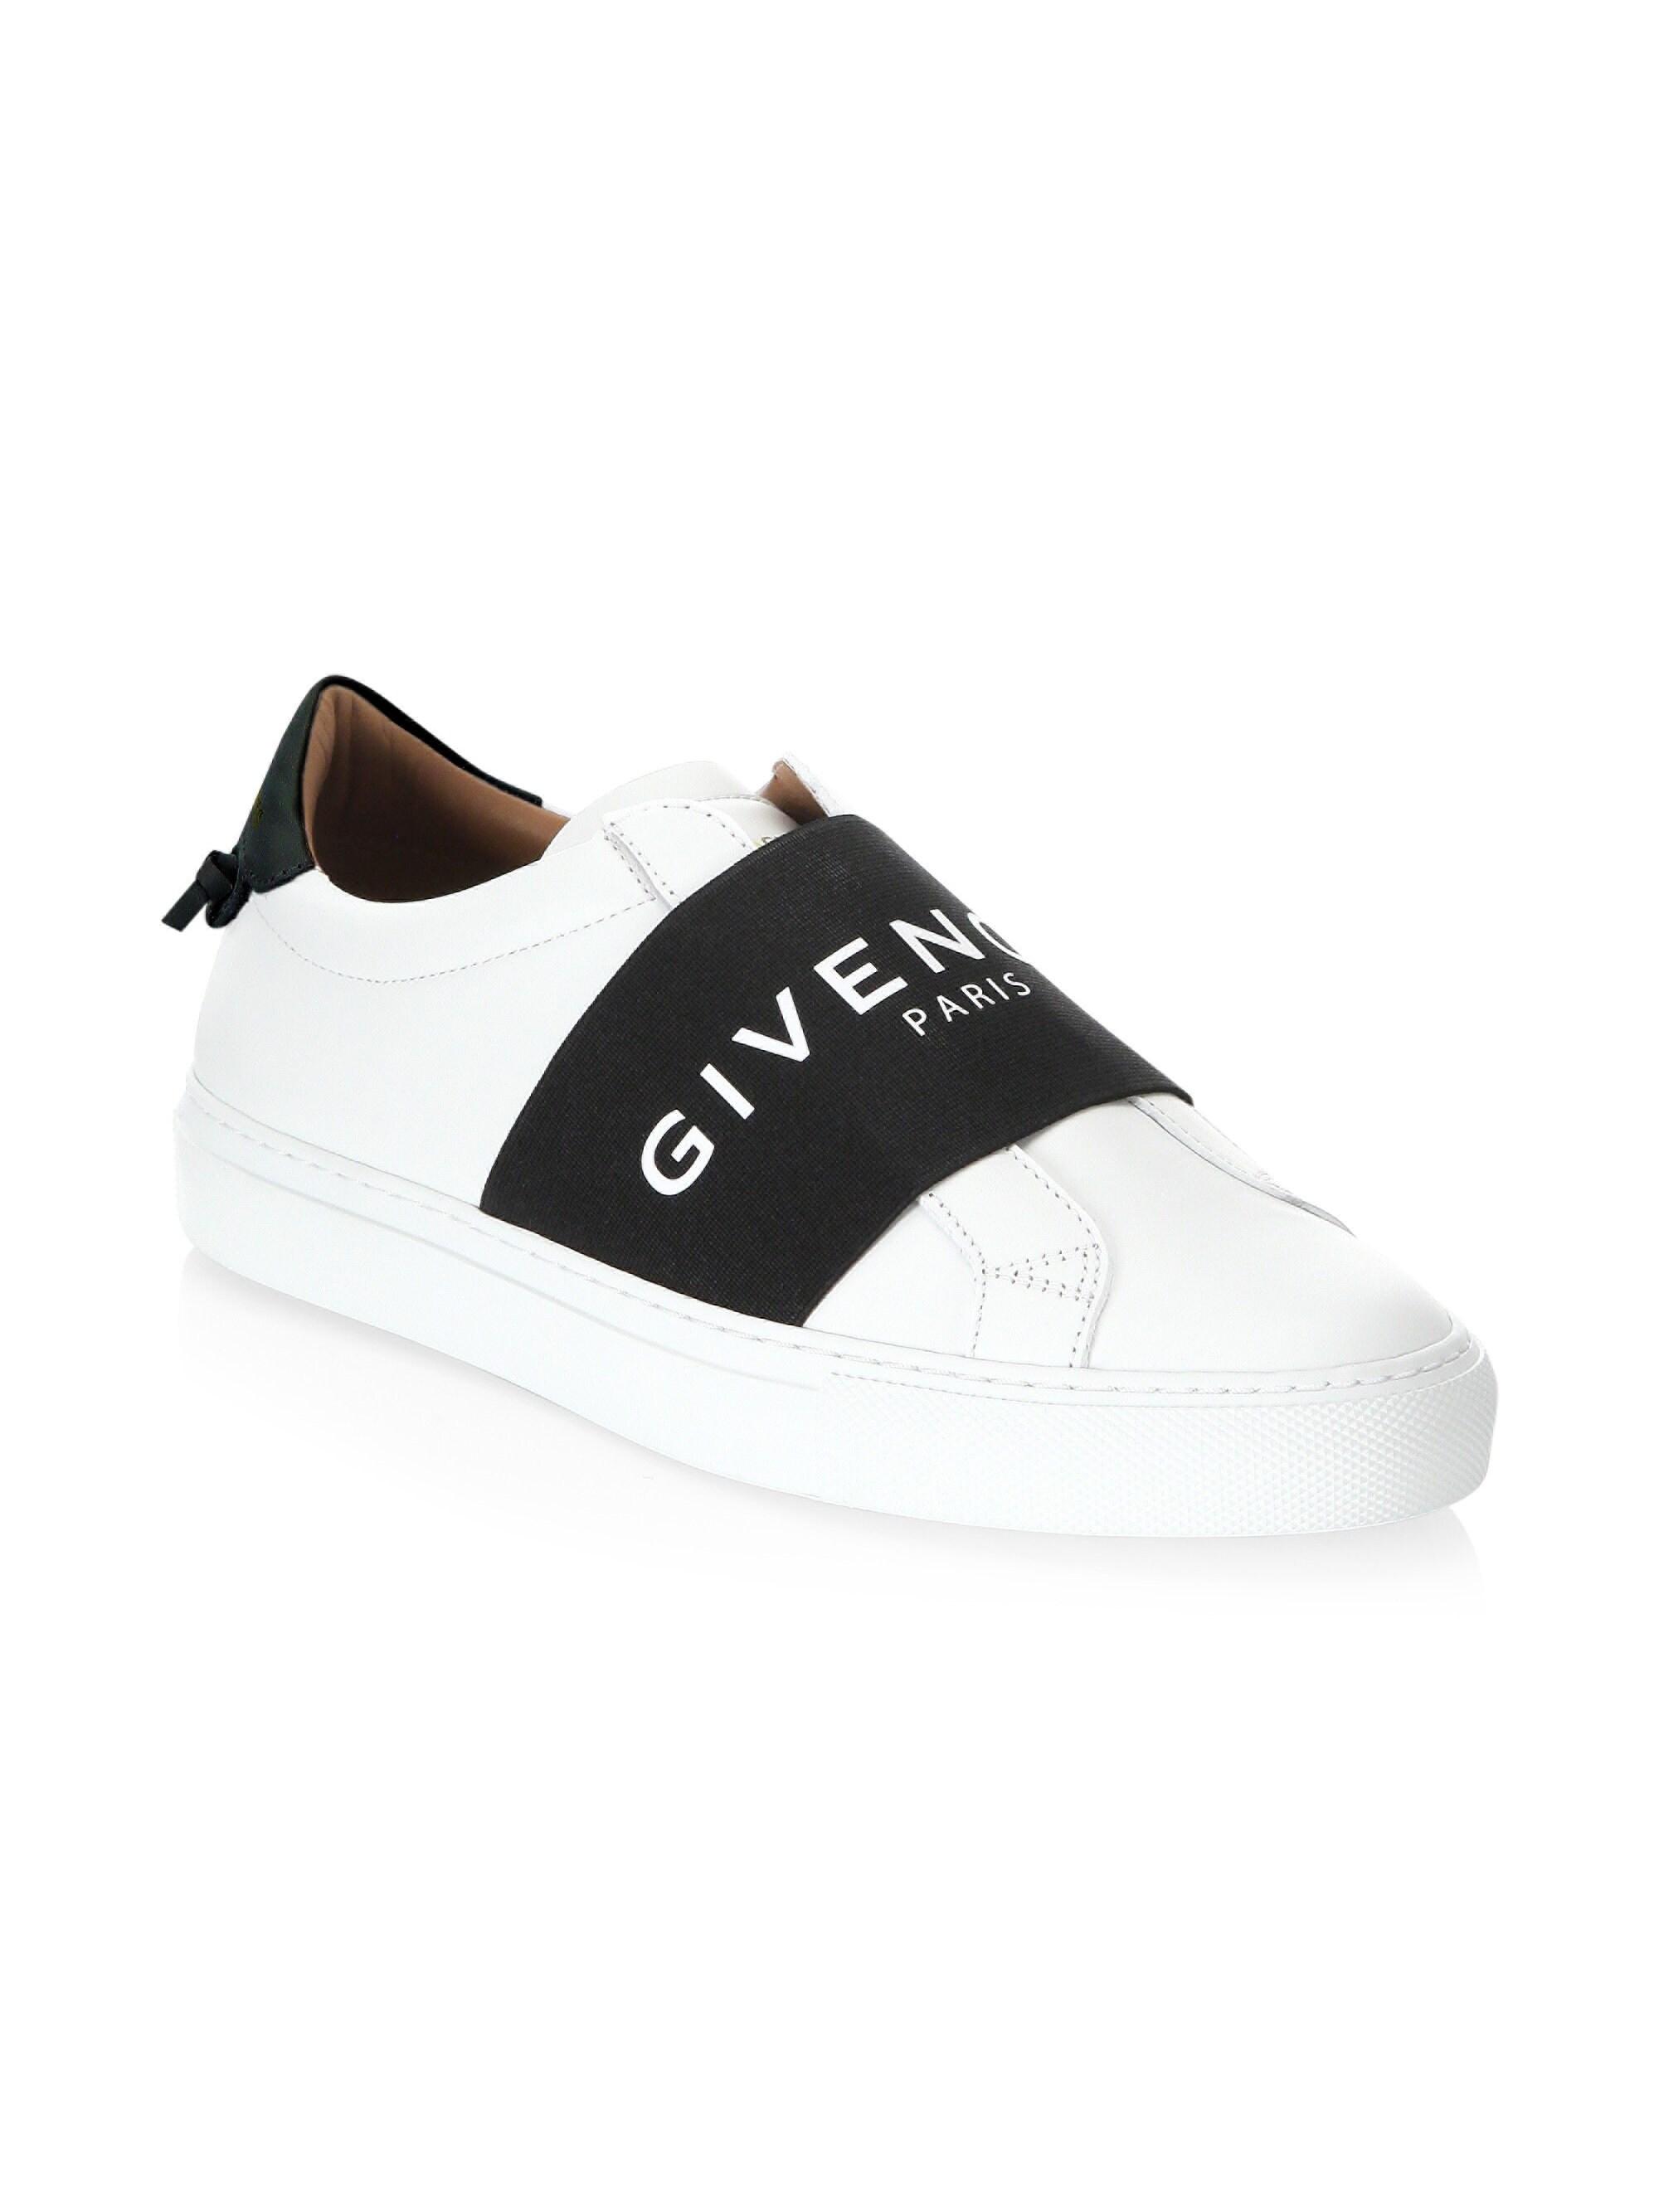 givenchy knot sneakers black